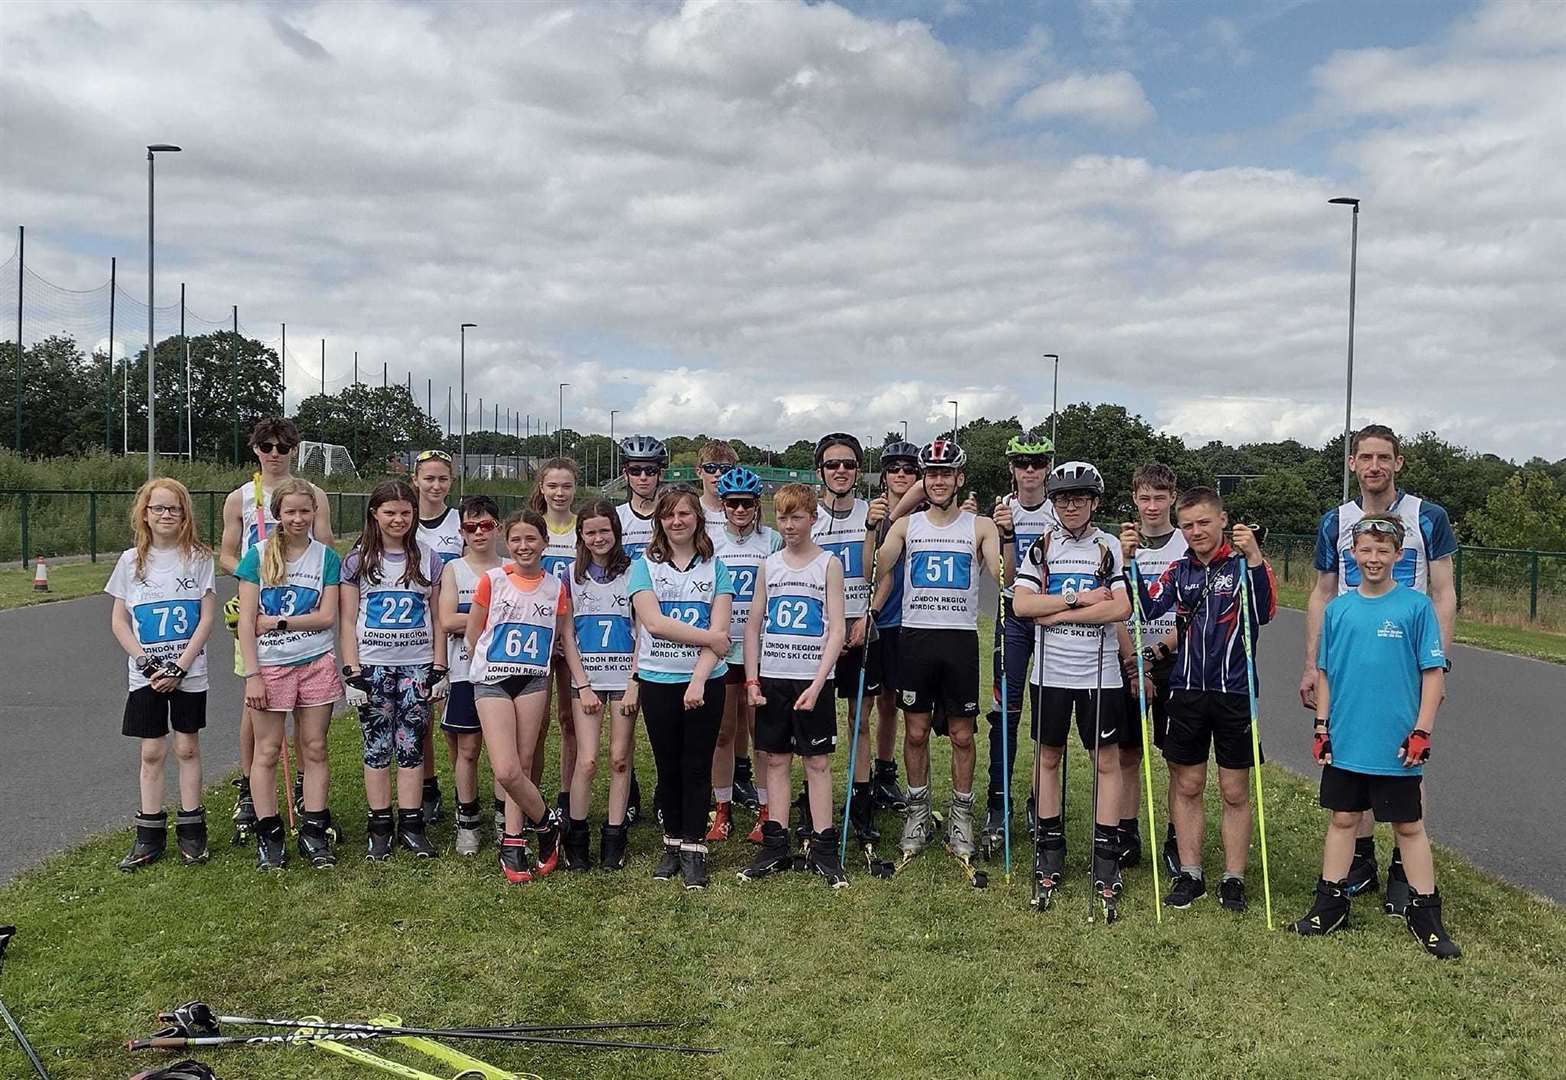 A healthy Scottish contingent of 19 Huntly and 5 Fife racers in Leeds at the weekend for the British Roller Ski Championships.